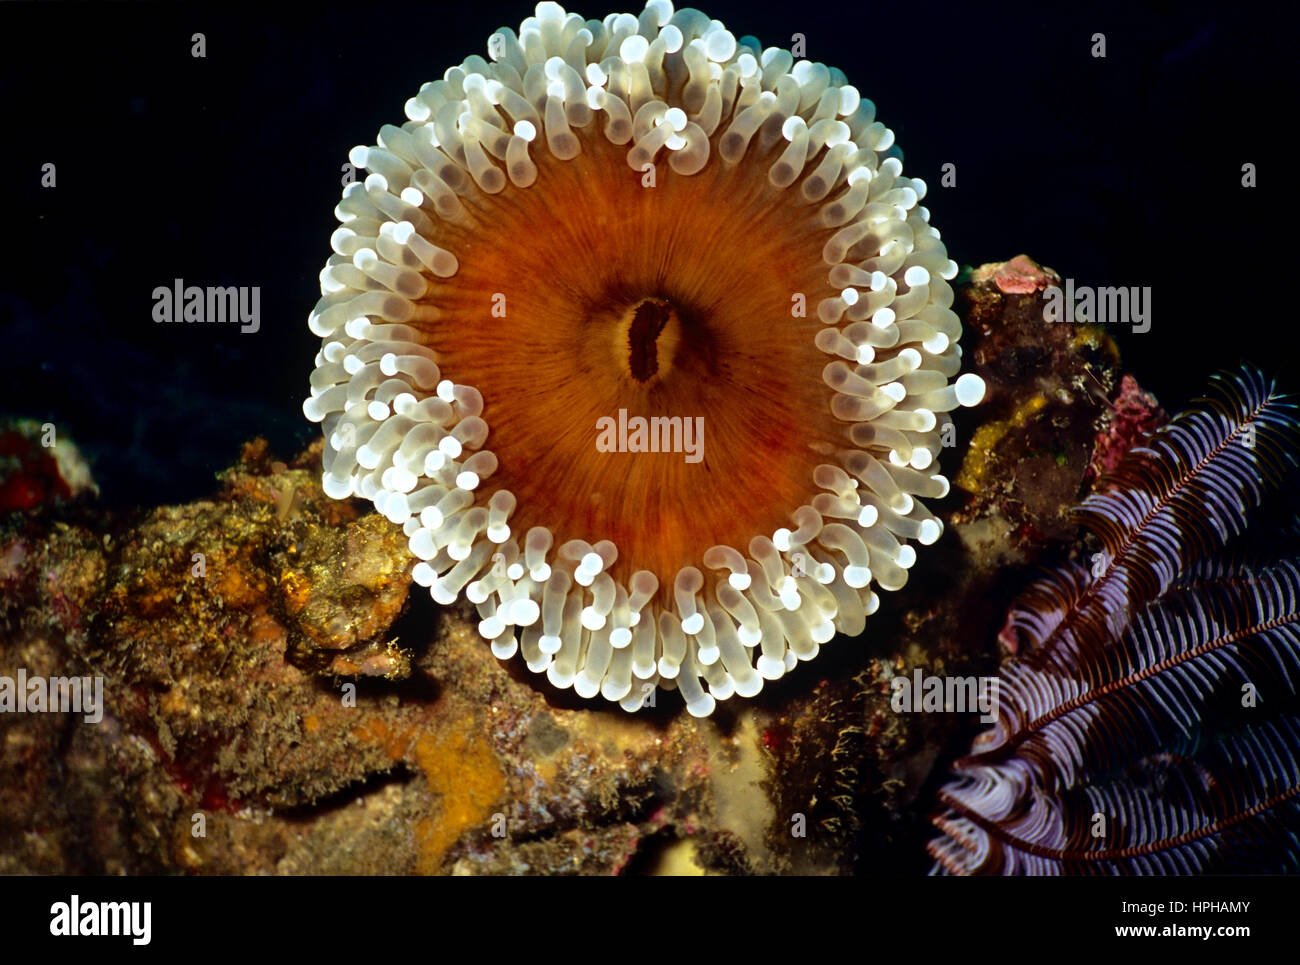 This aptly named magnificent anemone (Heteractis magnifica) shows the basic structure of the animal: a central mouth surrounded by tentacles. Bali. Stock Photo